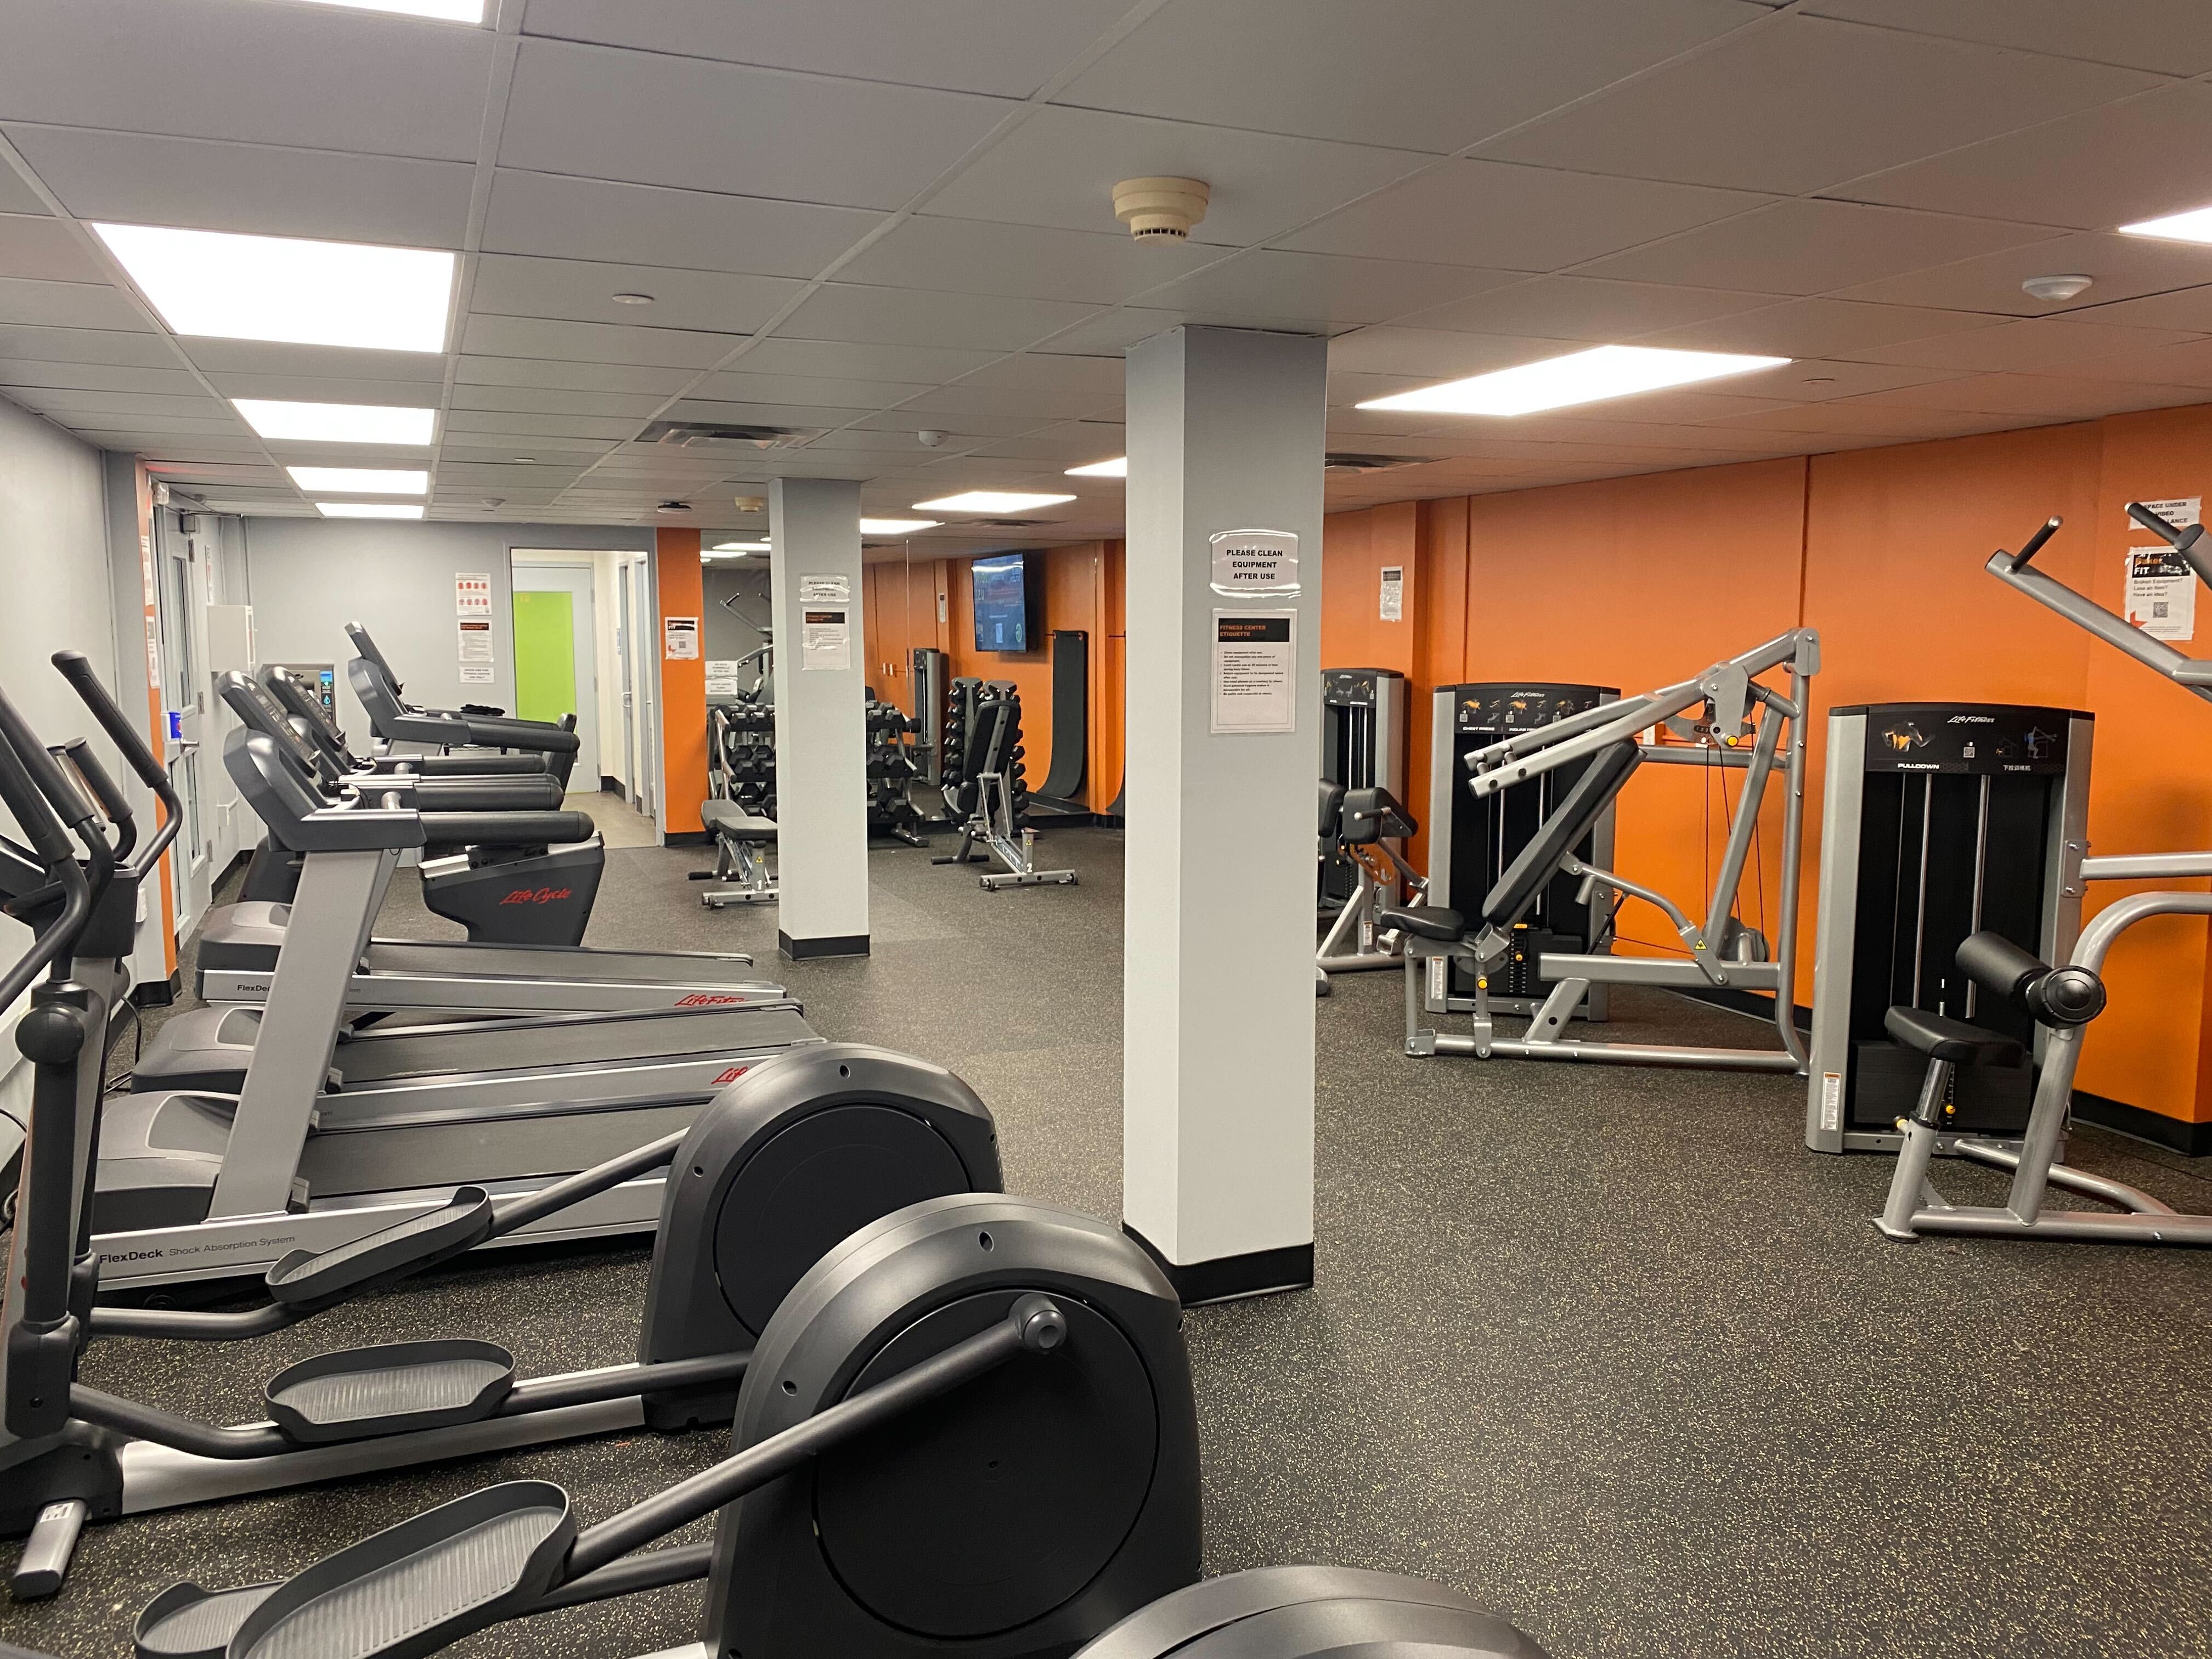 Cardio equipment, weight lifting equipment, and free weights